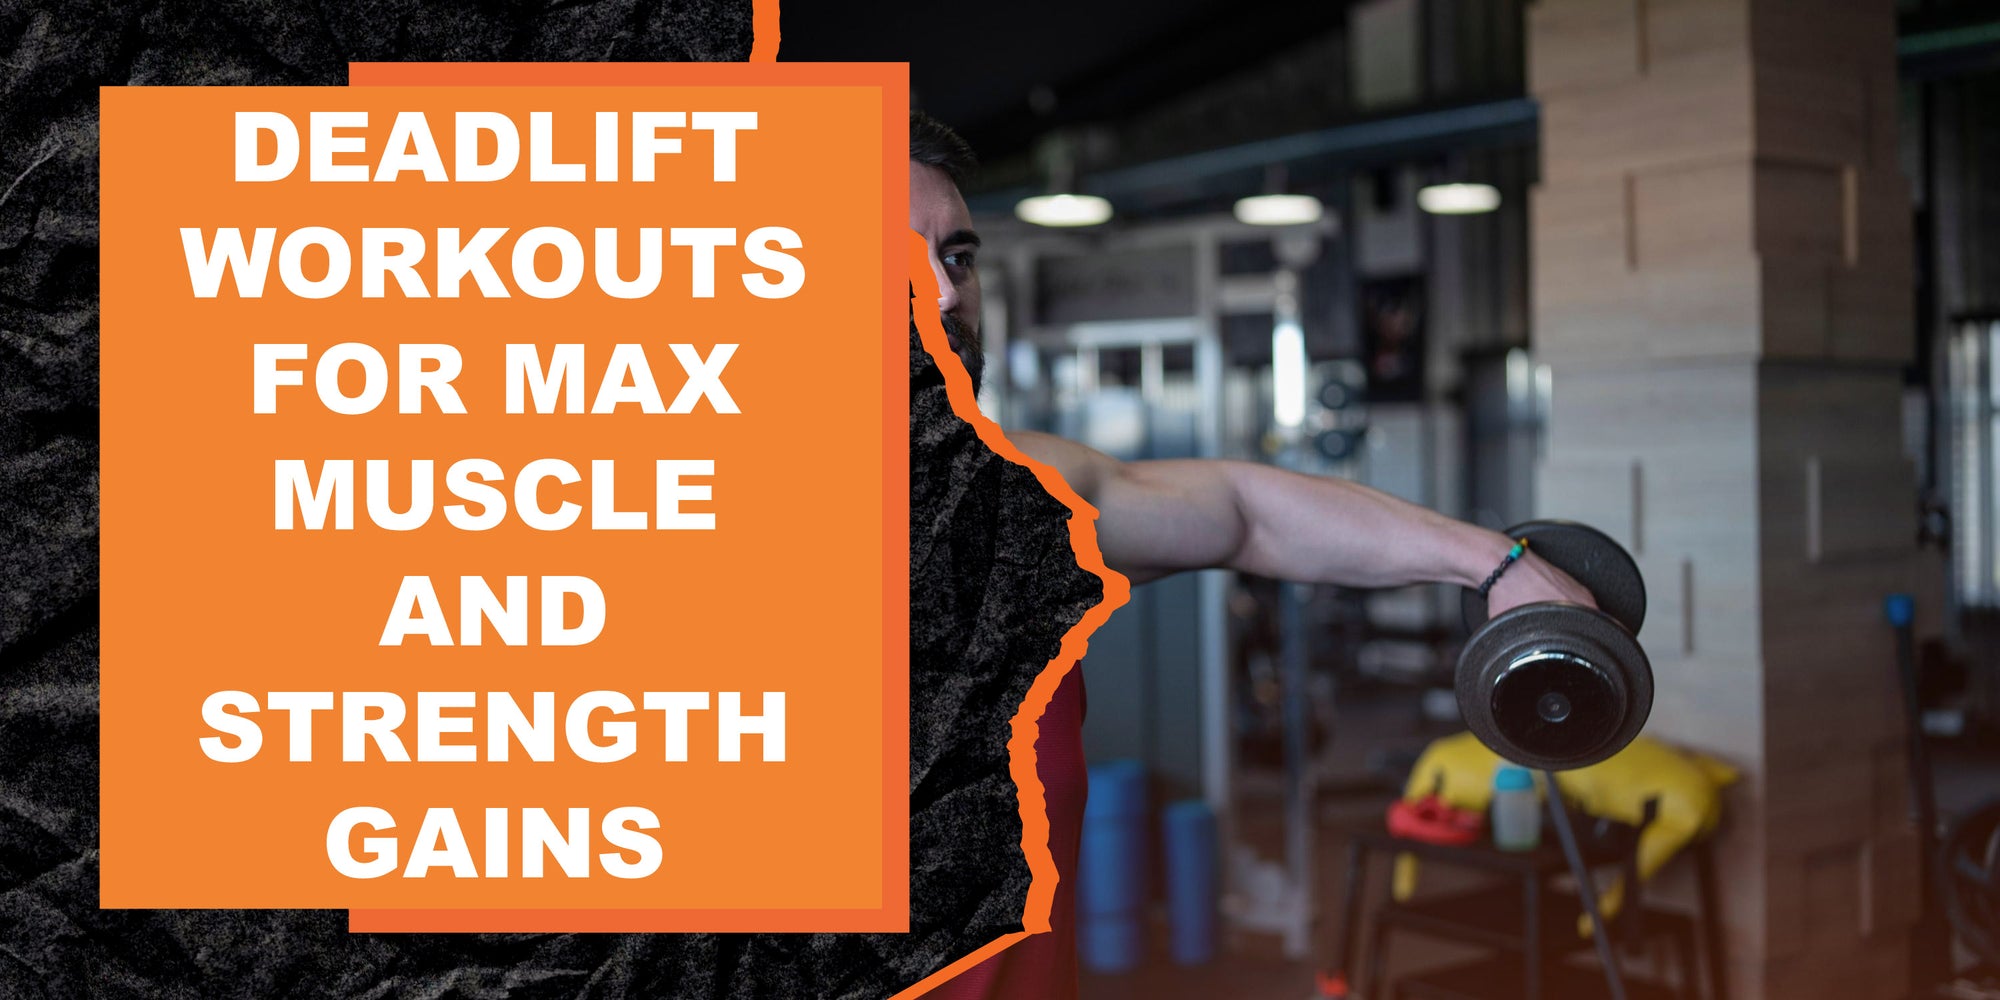 Deadlift Workouts for Max Muscle and Strength Gains